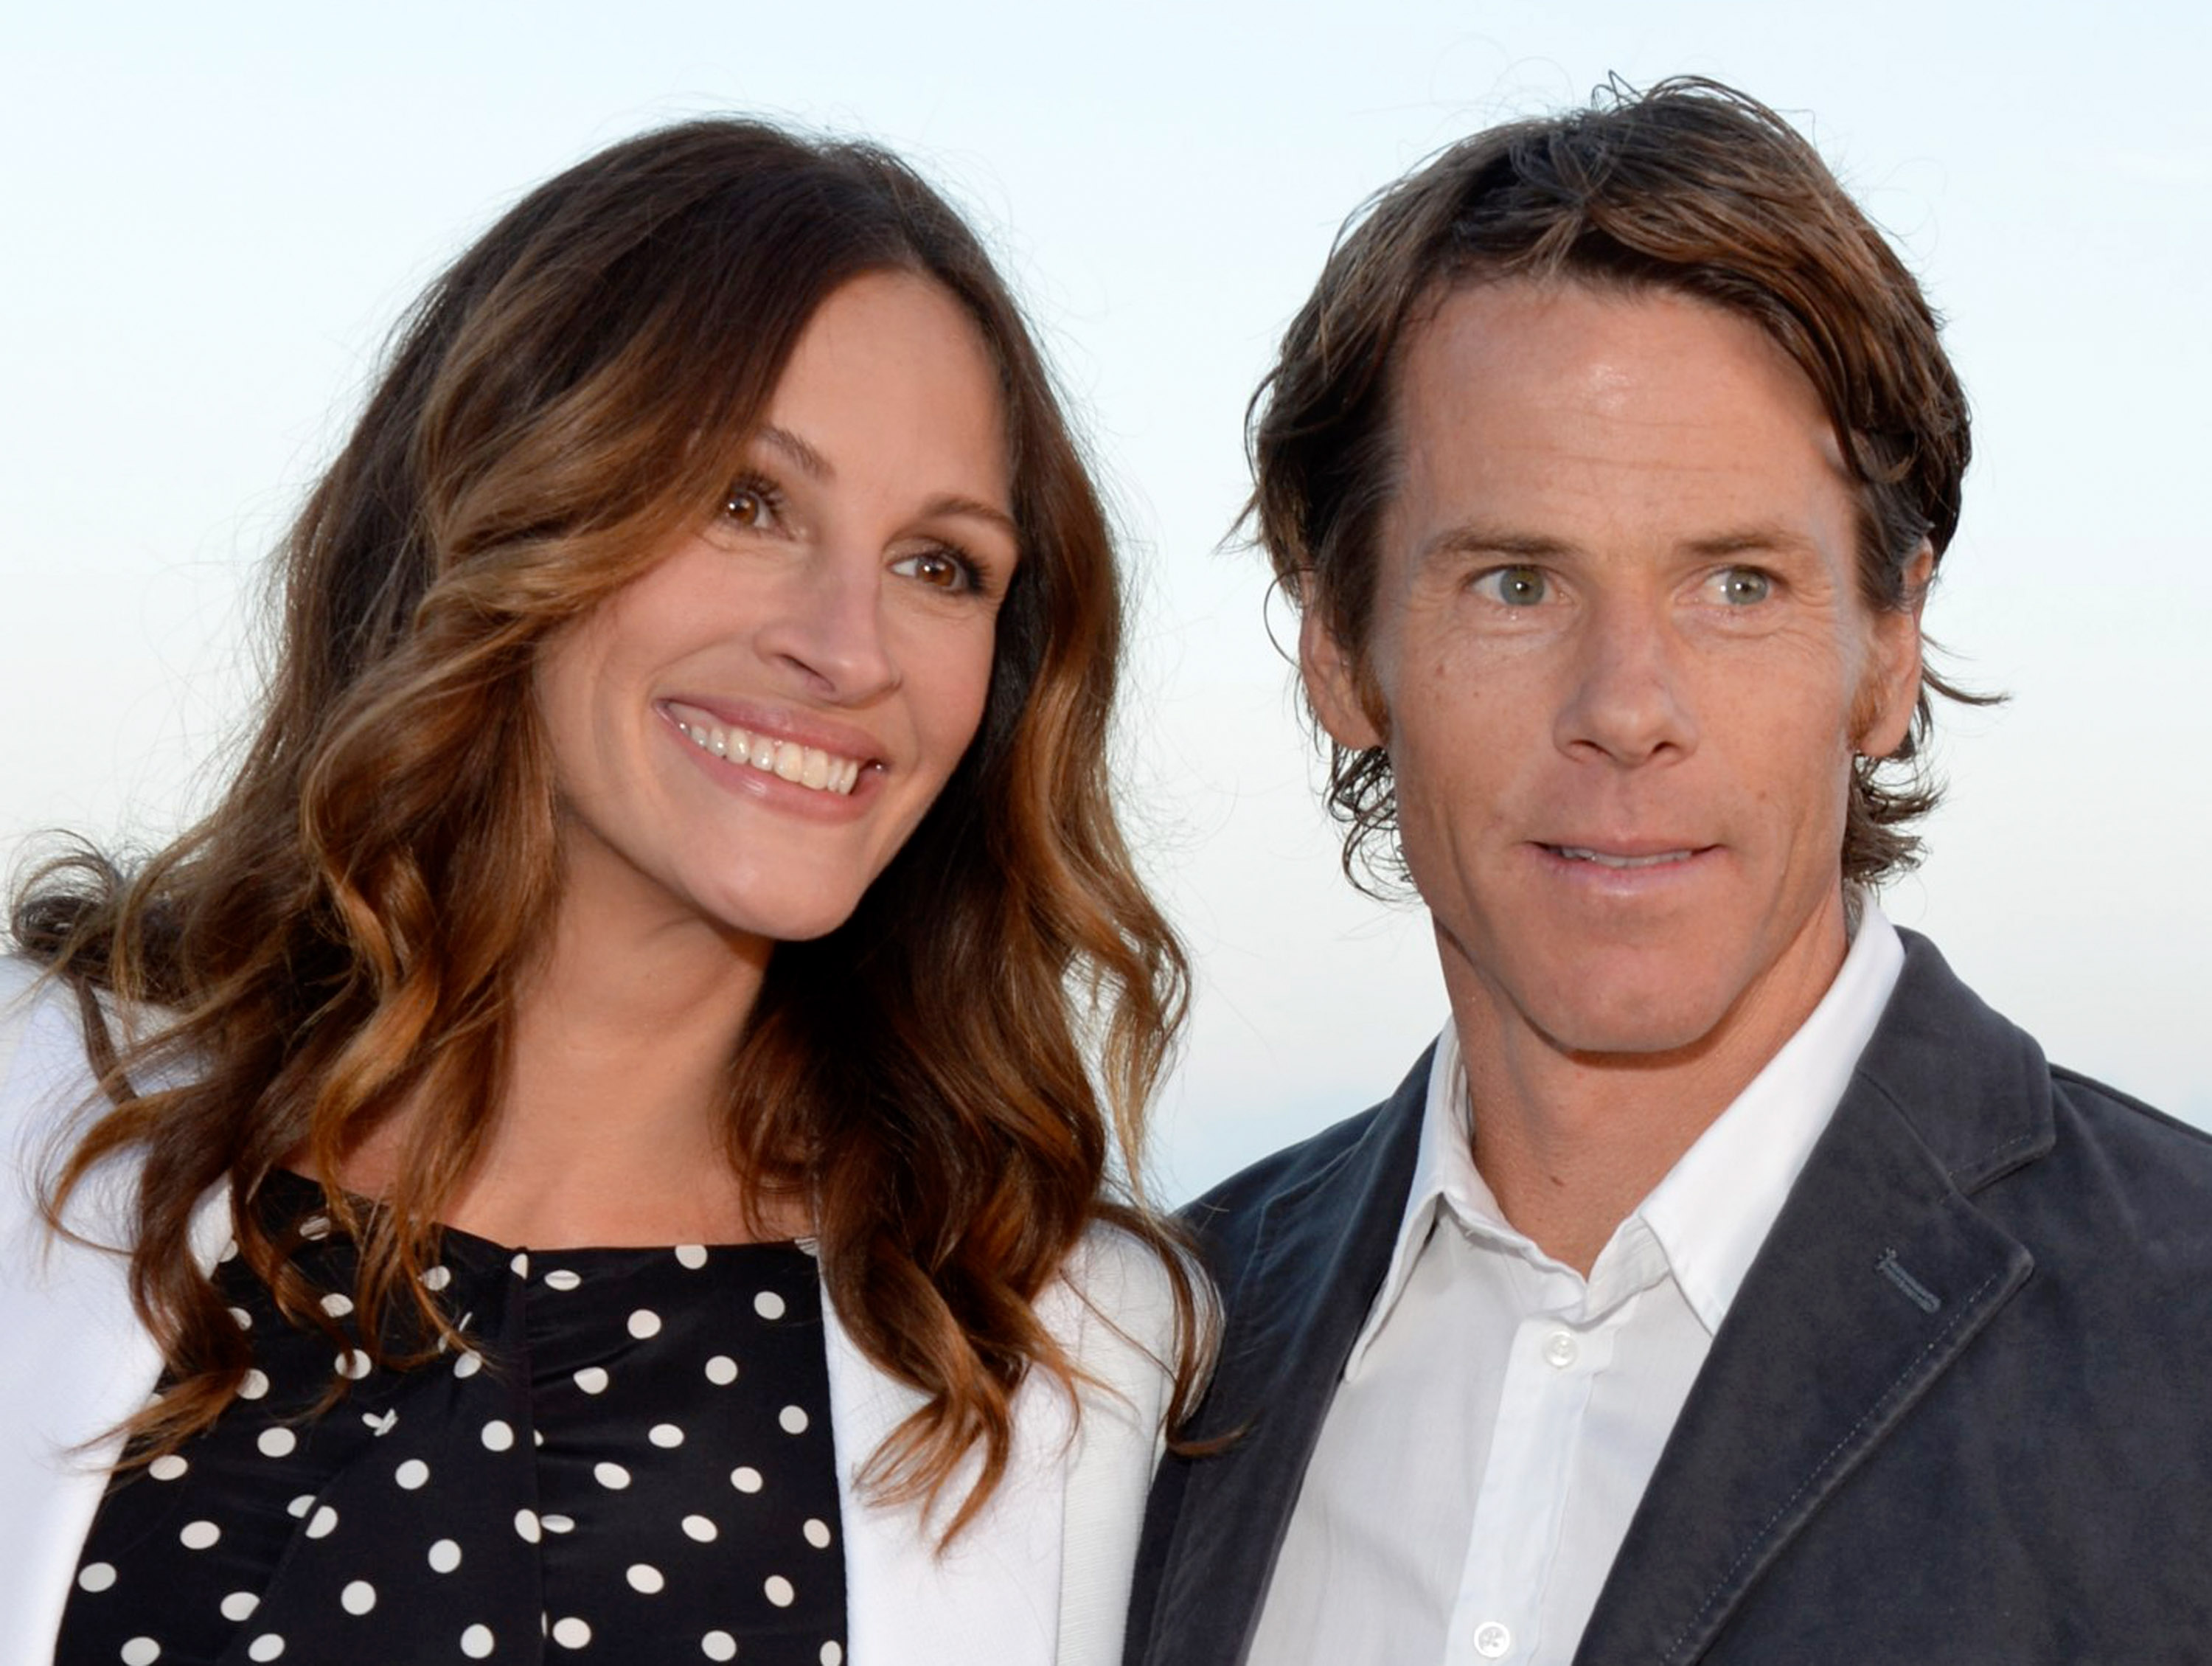 Danny Moder and Julia Roberts in Los Angeles in 2012 | Source: Getty Images